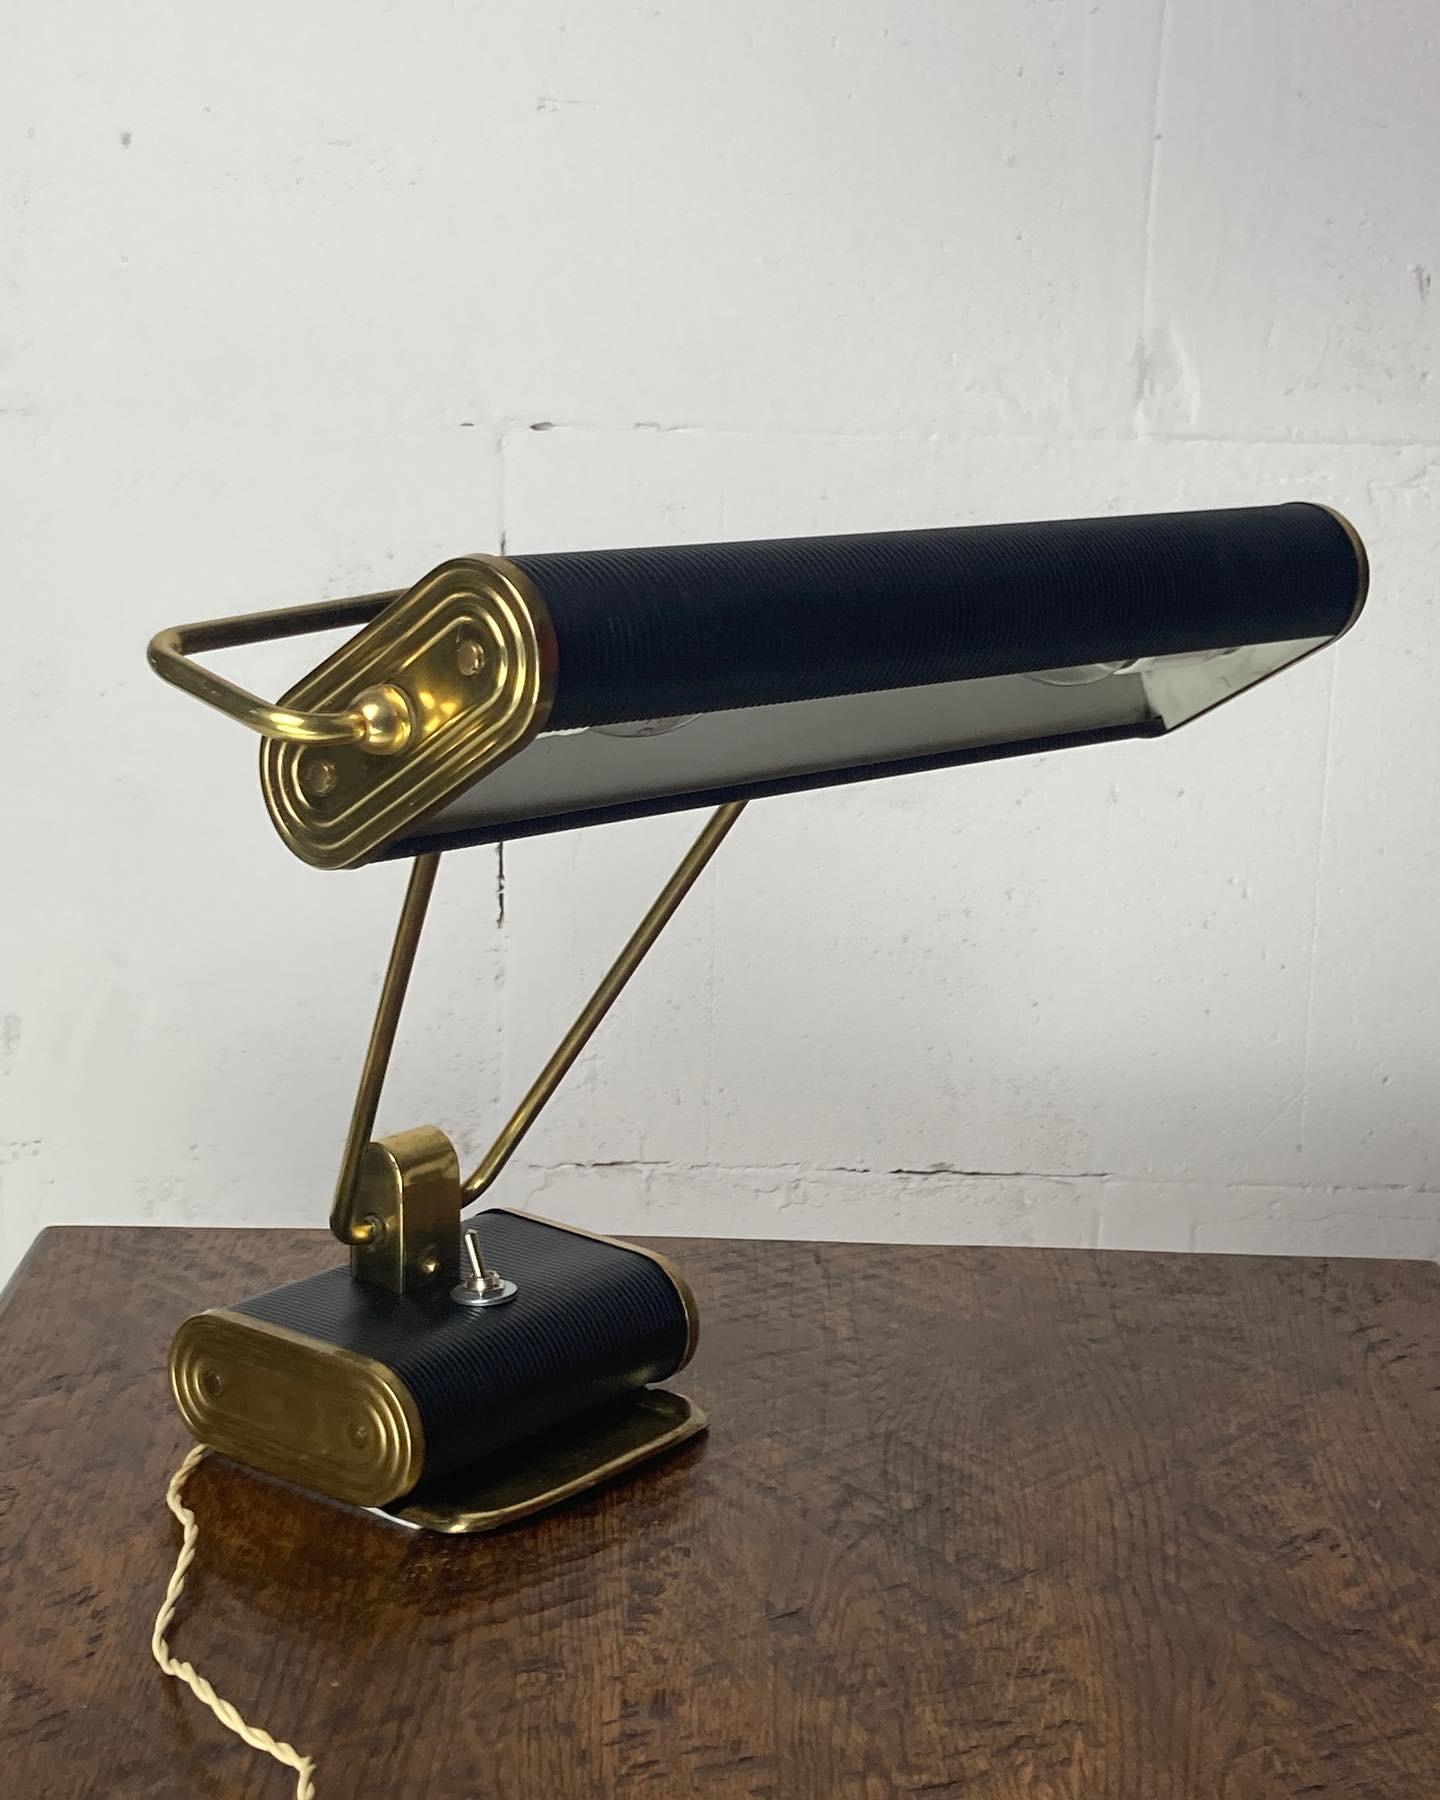 The iconic model n71 or jumo in the most coveted version in black with gold brass details. This desk lamp is in good condition considering its age, this is also one of the earliest editions with the metal on and off switch which later was produced